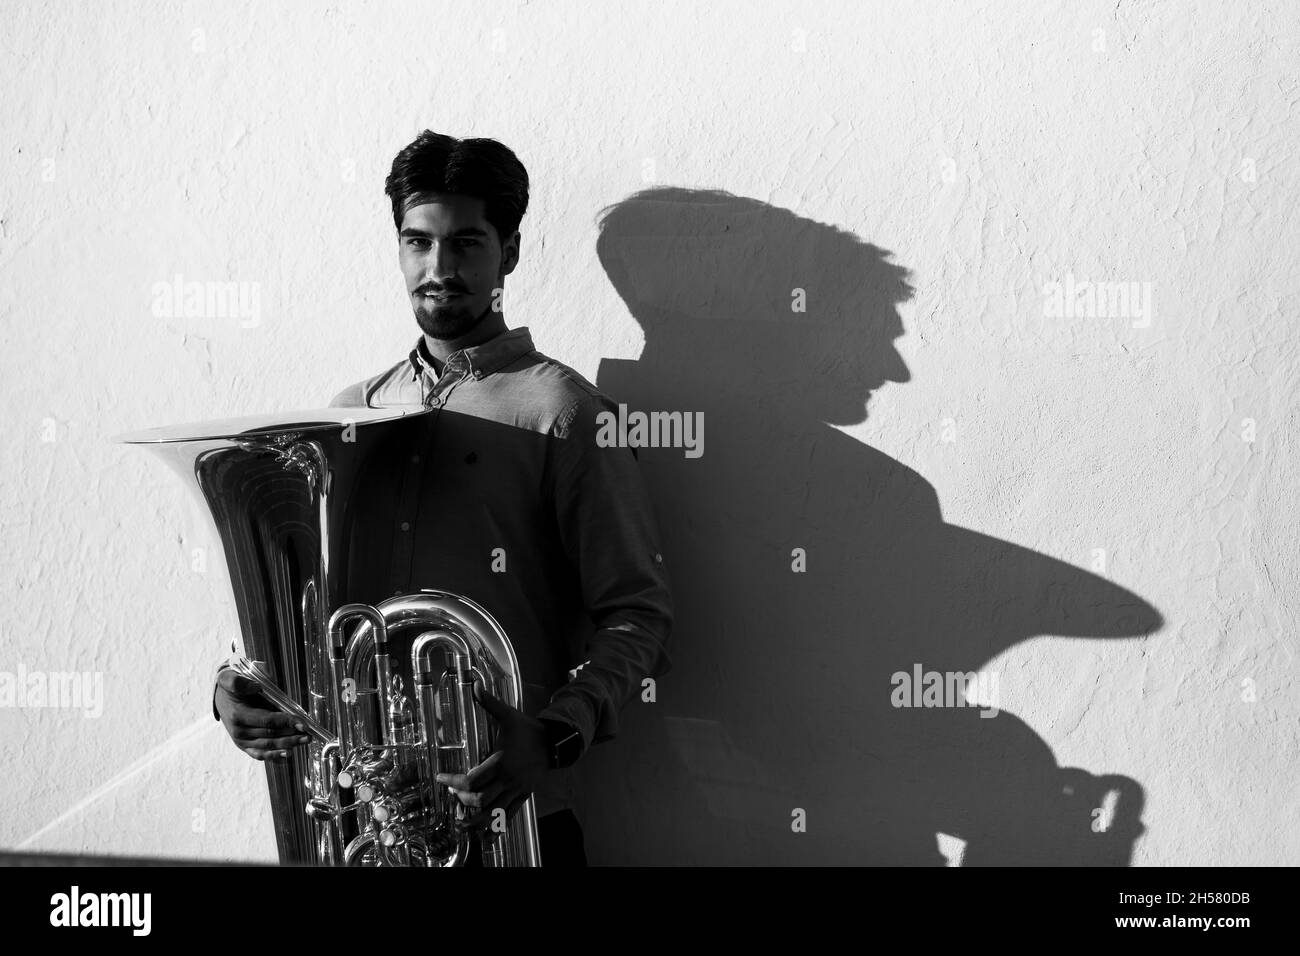 A male musician with a tuba and his shadow on a white wall. Black and white photo. Stock Photo